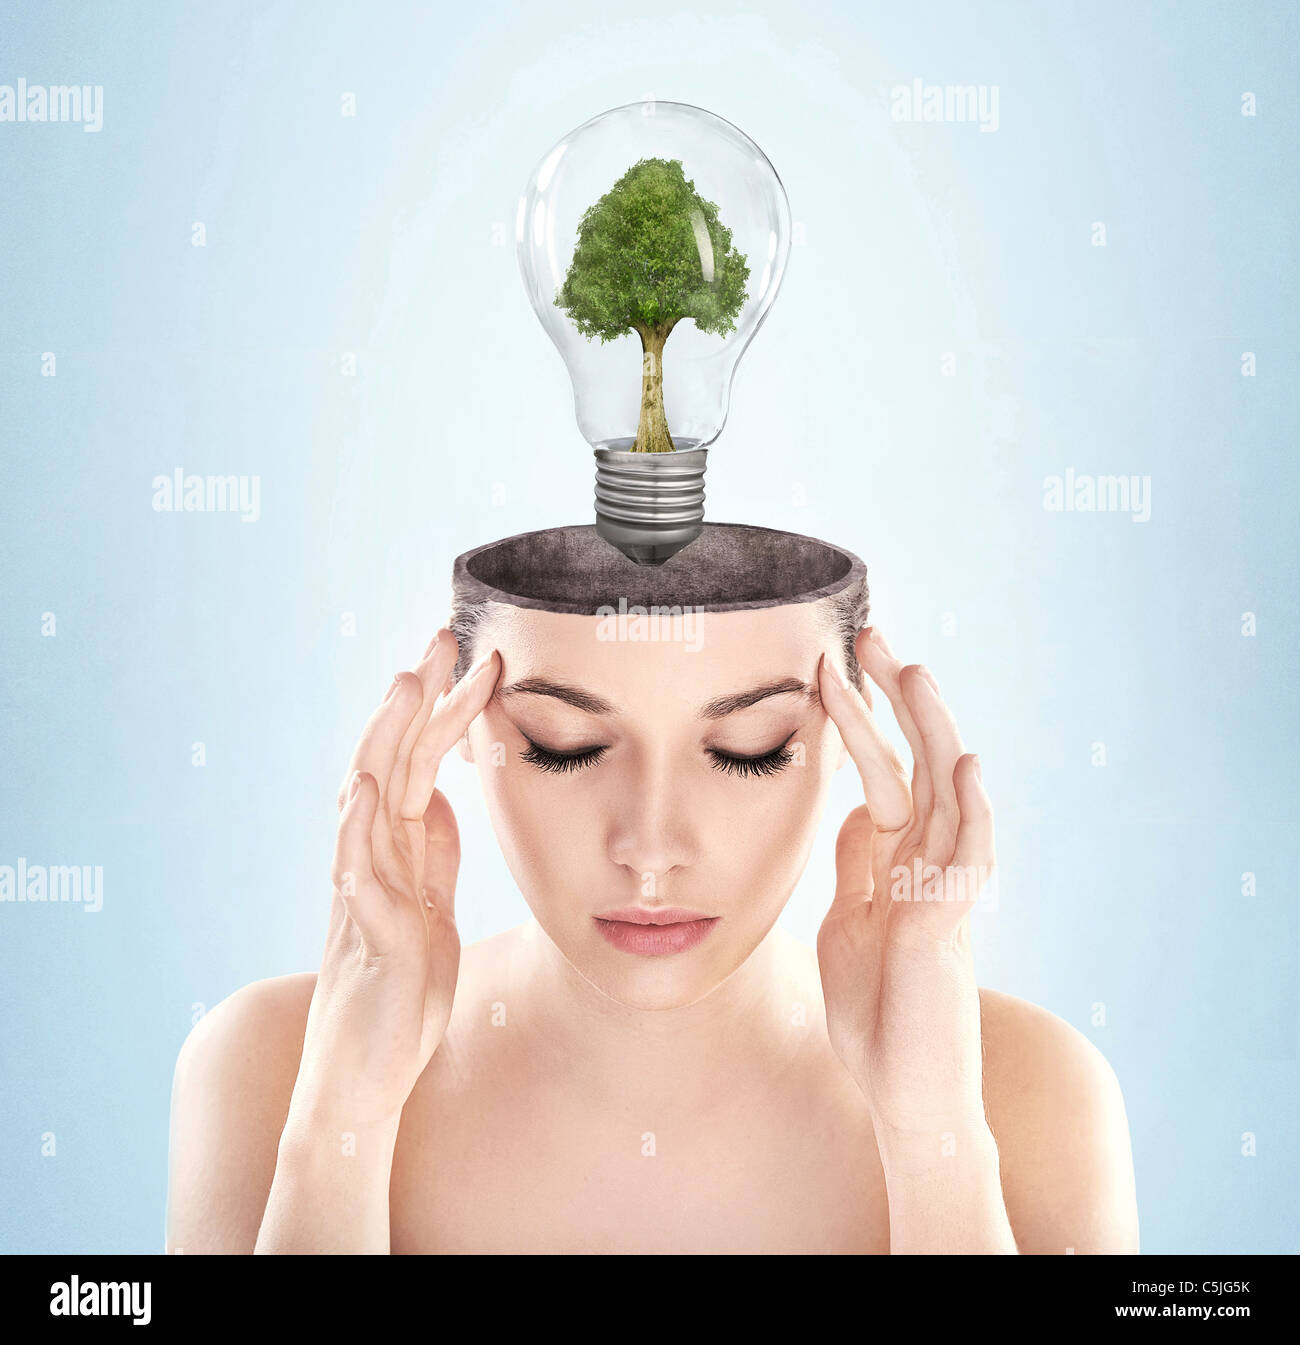 Open minded woman with green energy symbol Stock Photo